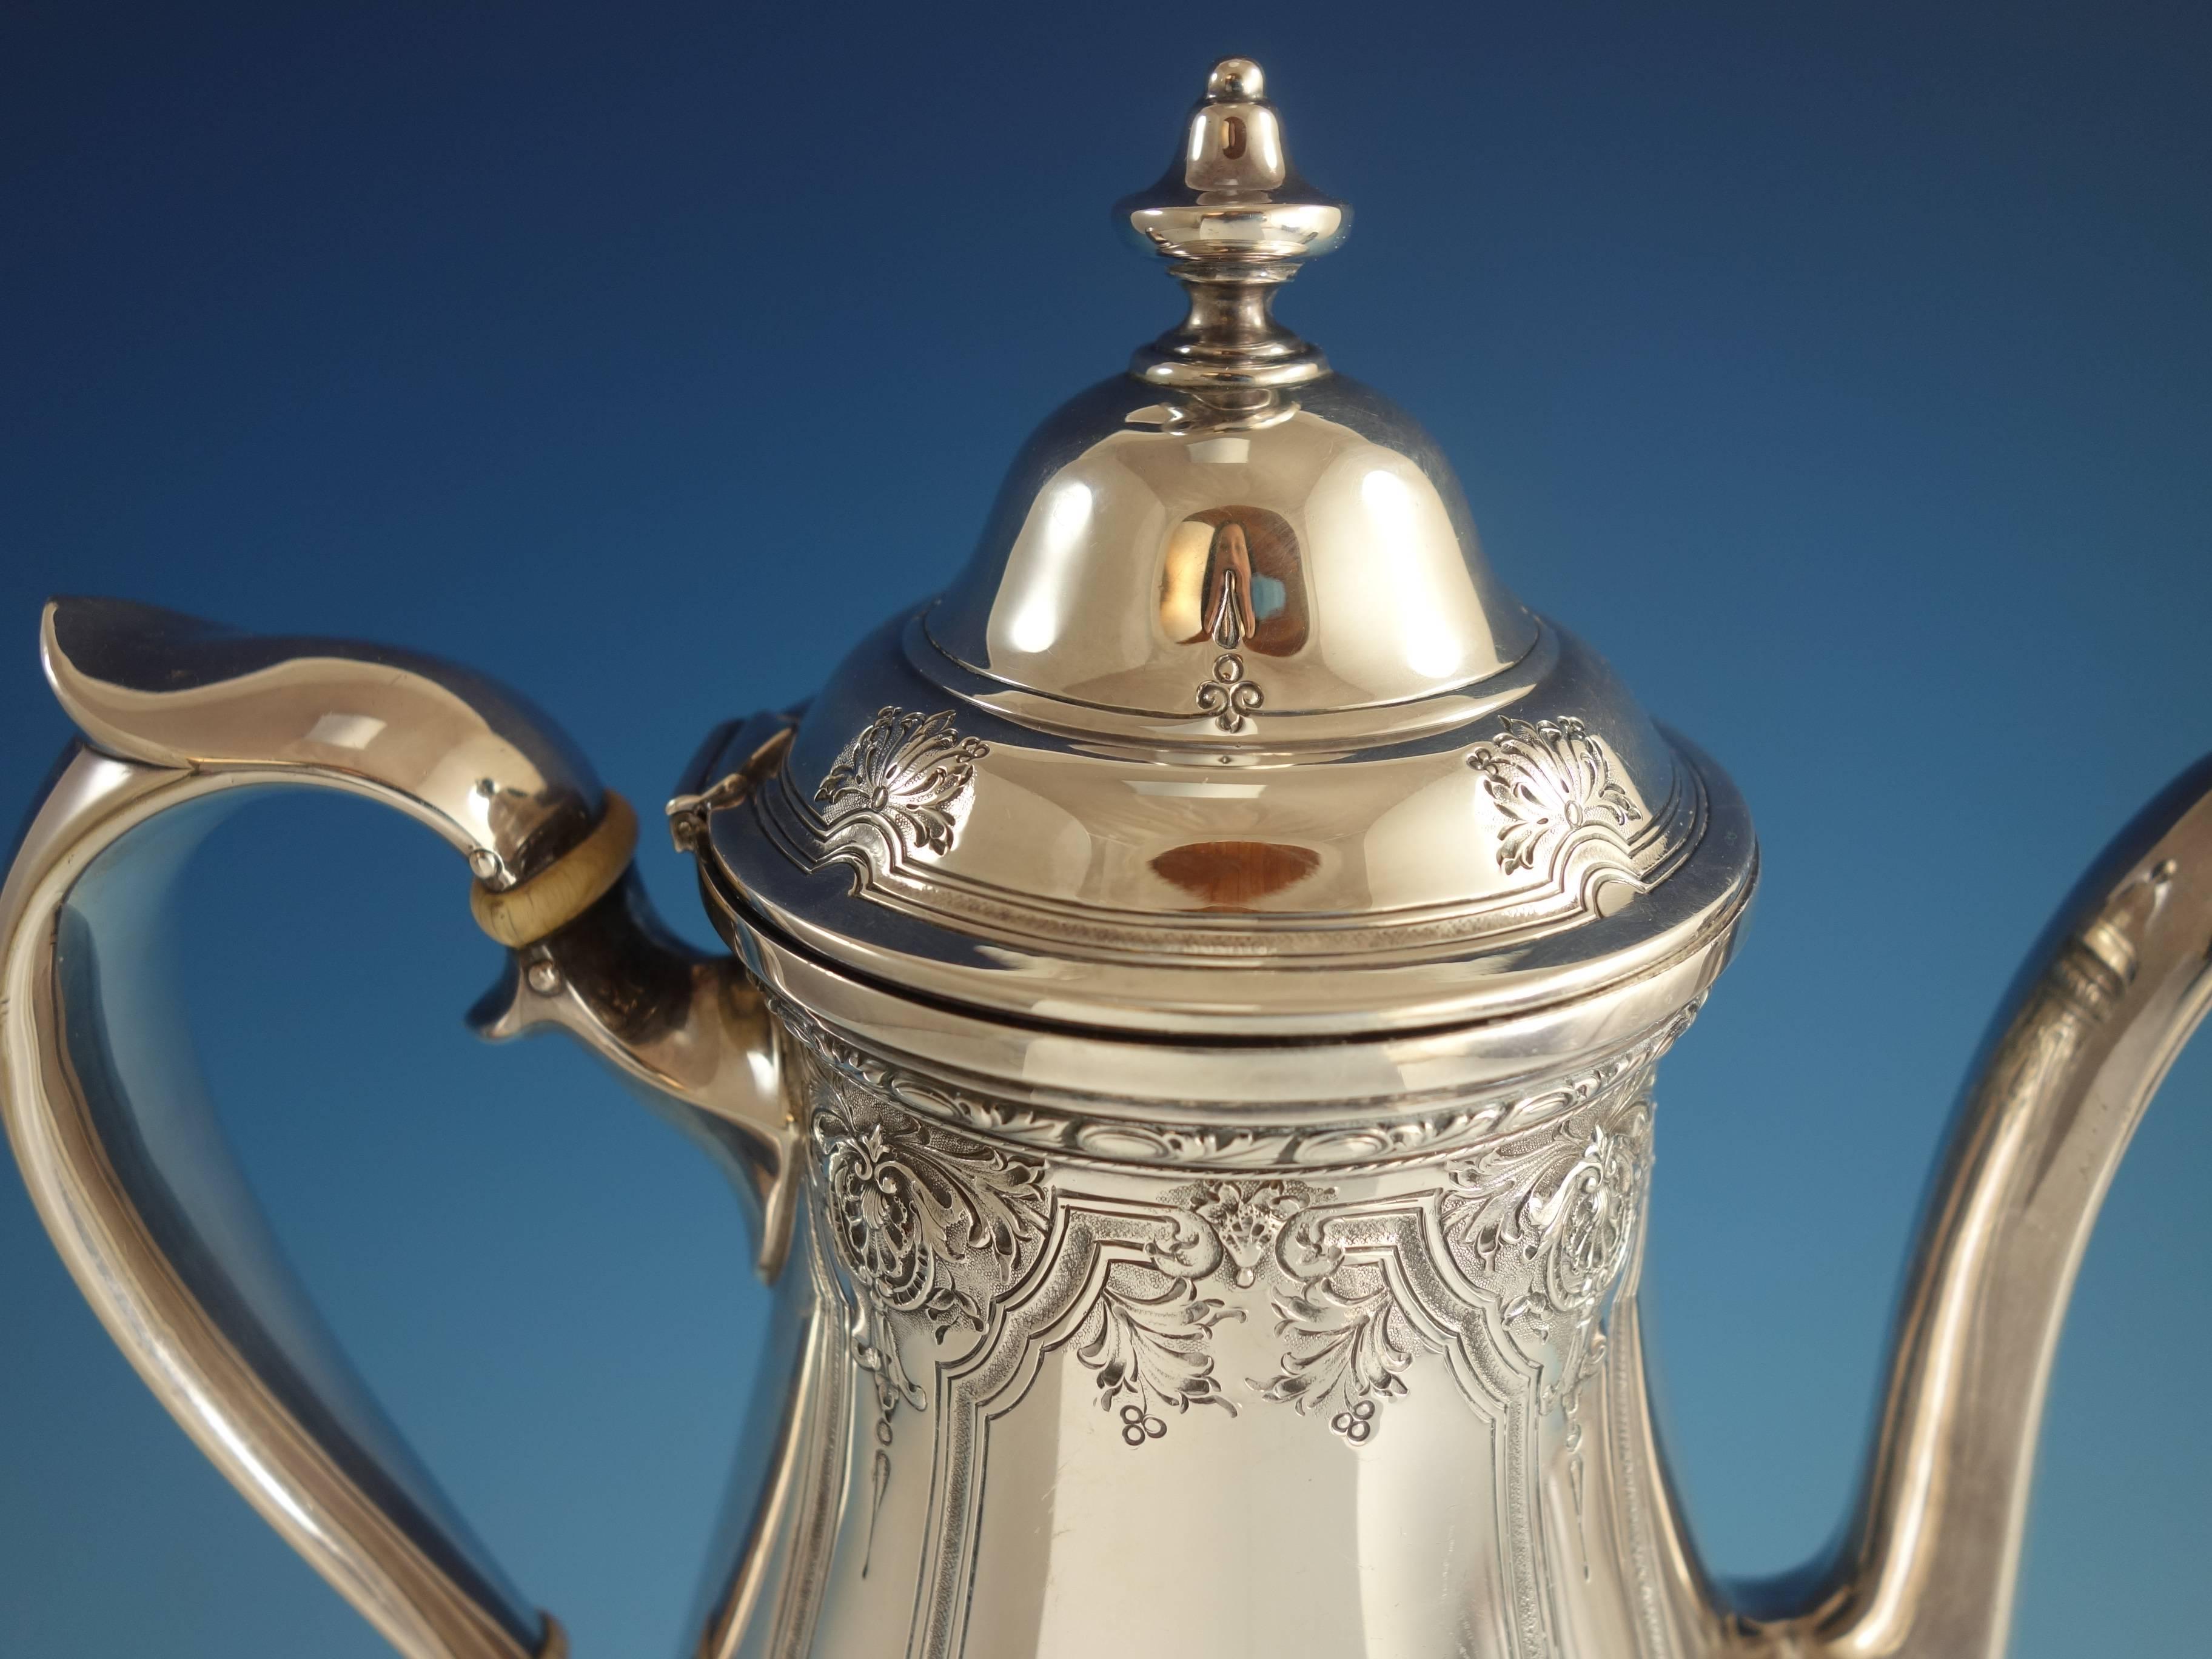 Navarre by Watson sterling silver coffee pot. It is beautifully chased. The piece has a scrolly monogram (see photos), and it's marked with #9826. The coffee pot measures 10